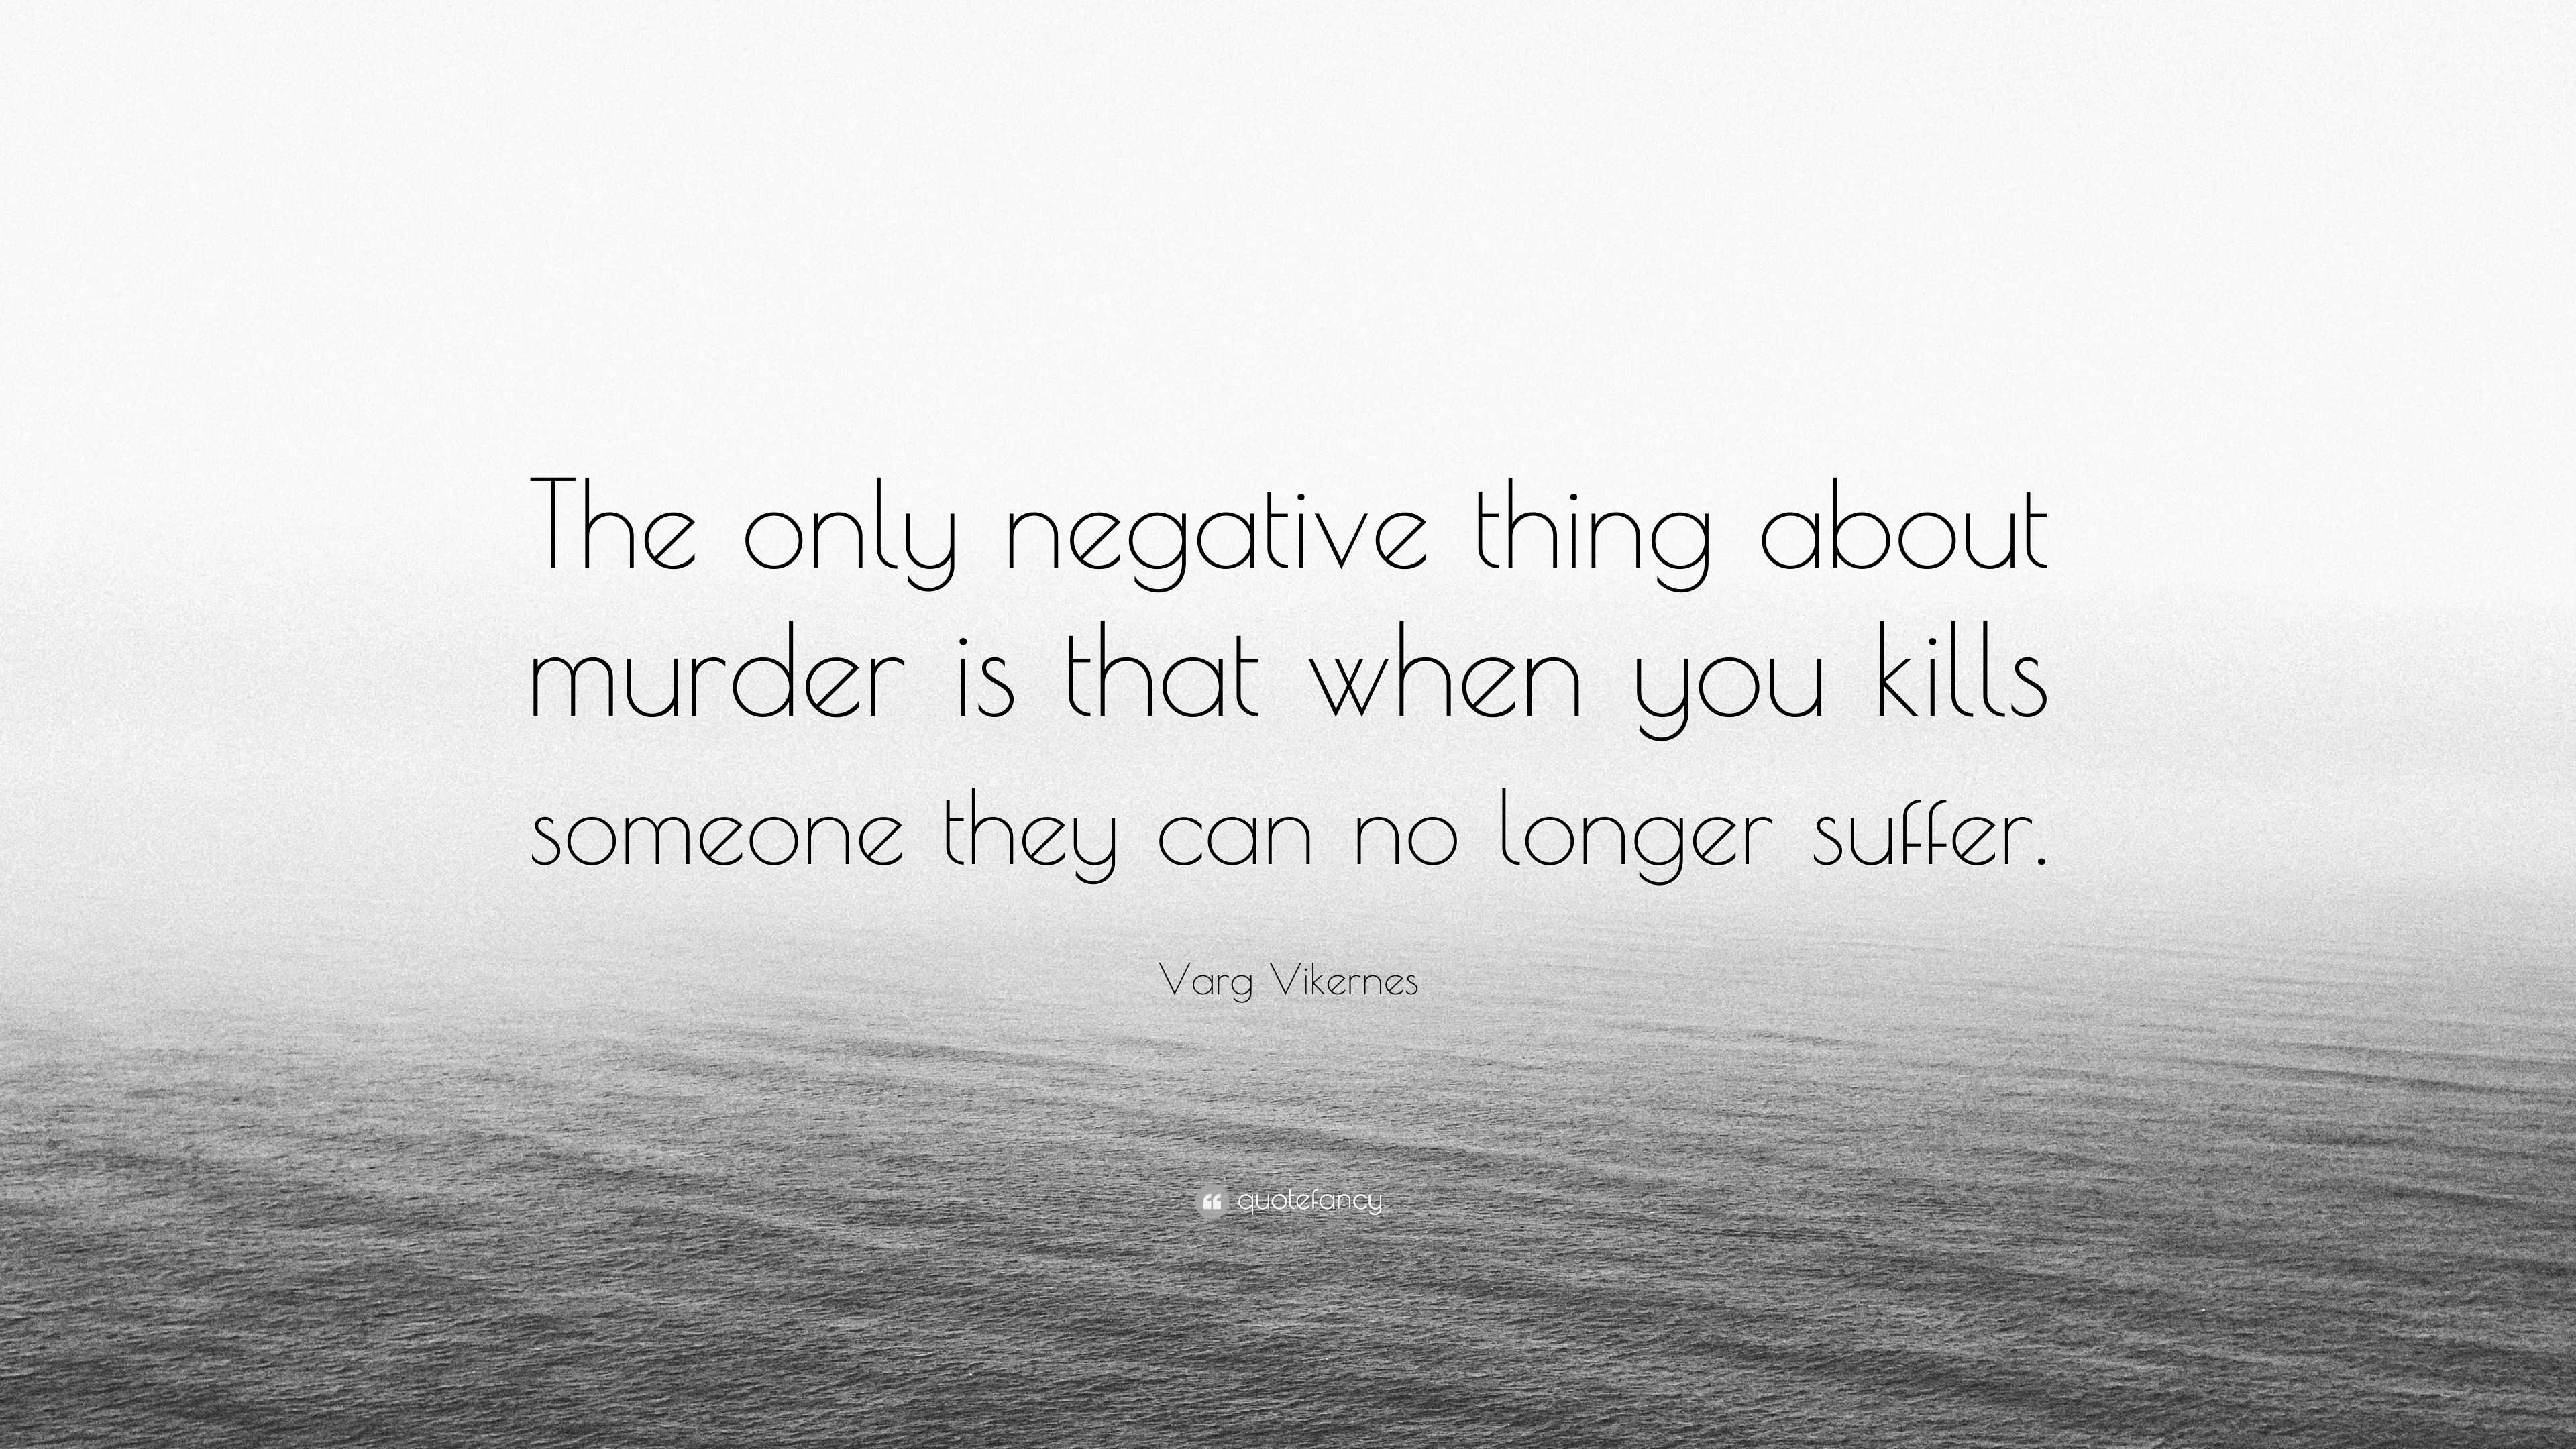 Varg Vikernes Quote: "The only negative thing about murder is that when you kills someone they ...